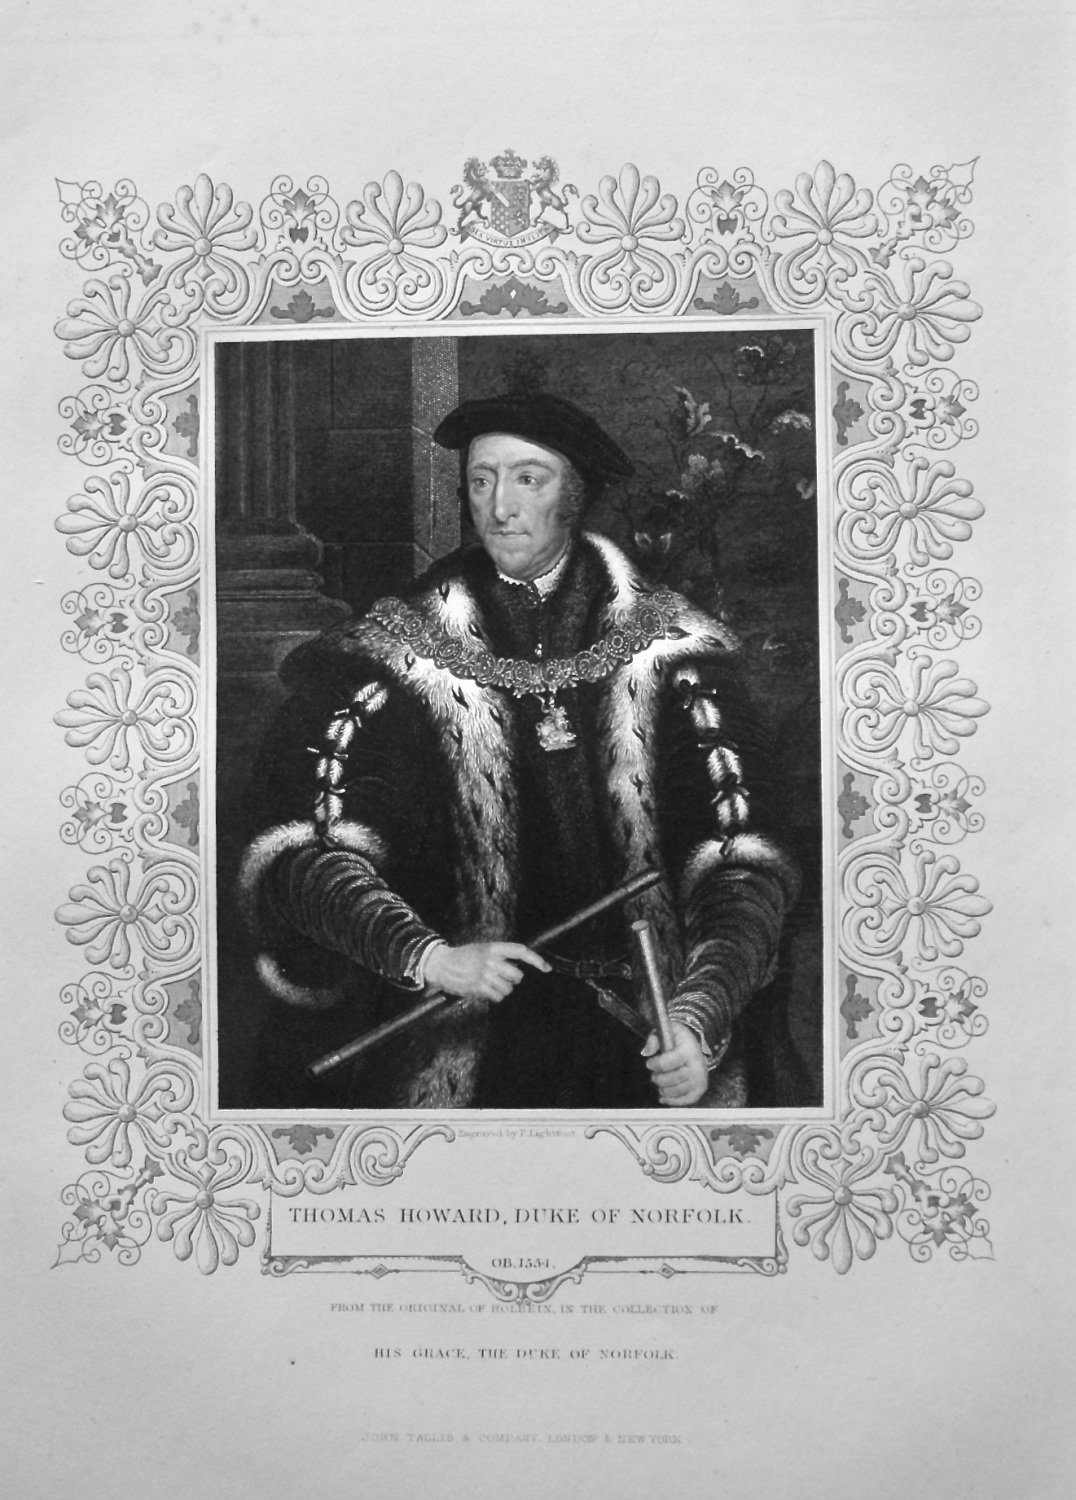 Thomas Howard, Duke of Norfolk. OB. 1554. From the original of Holbein, in 